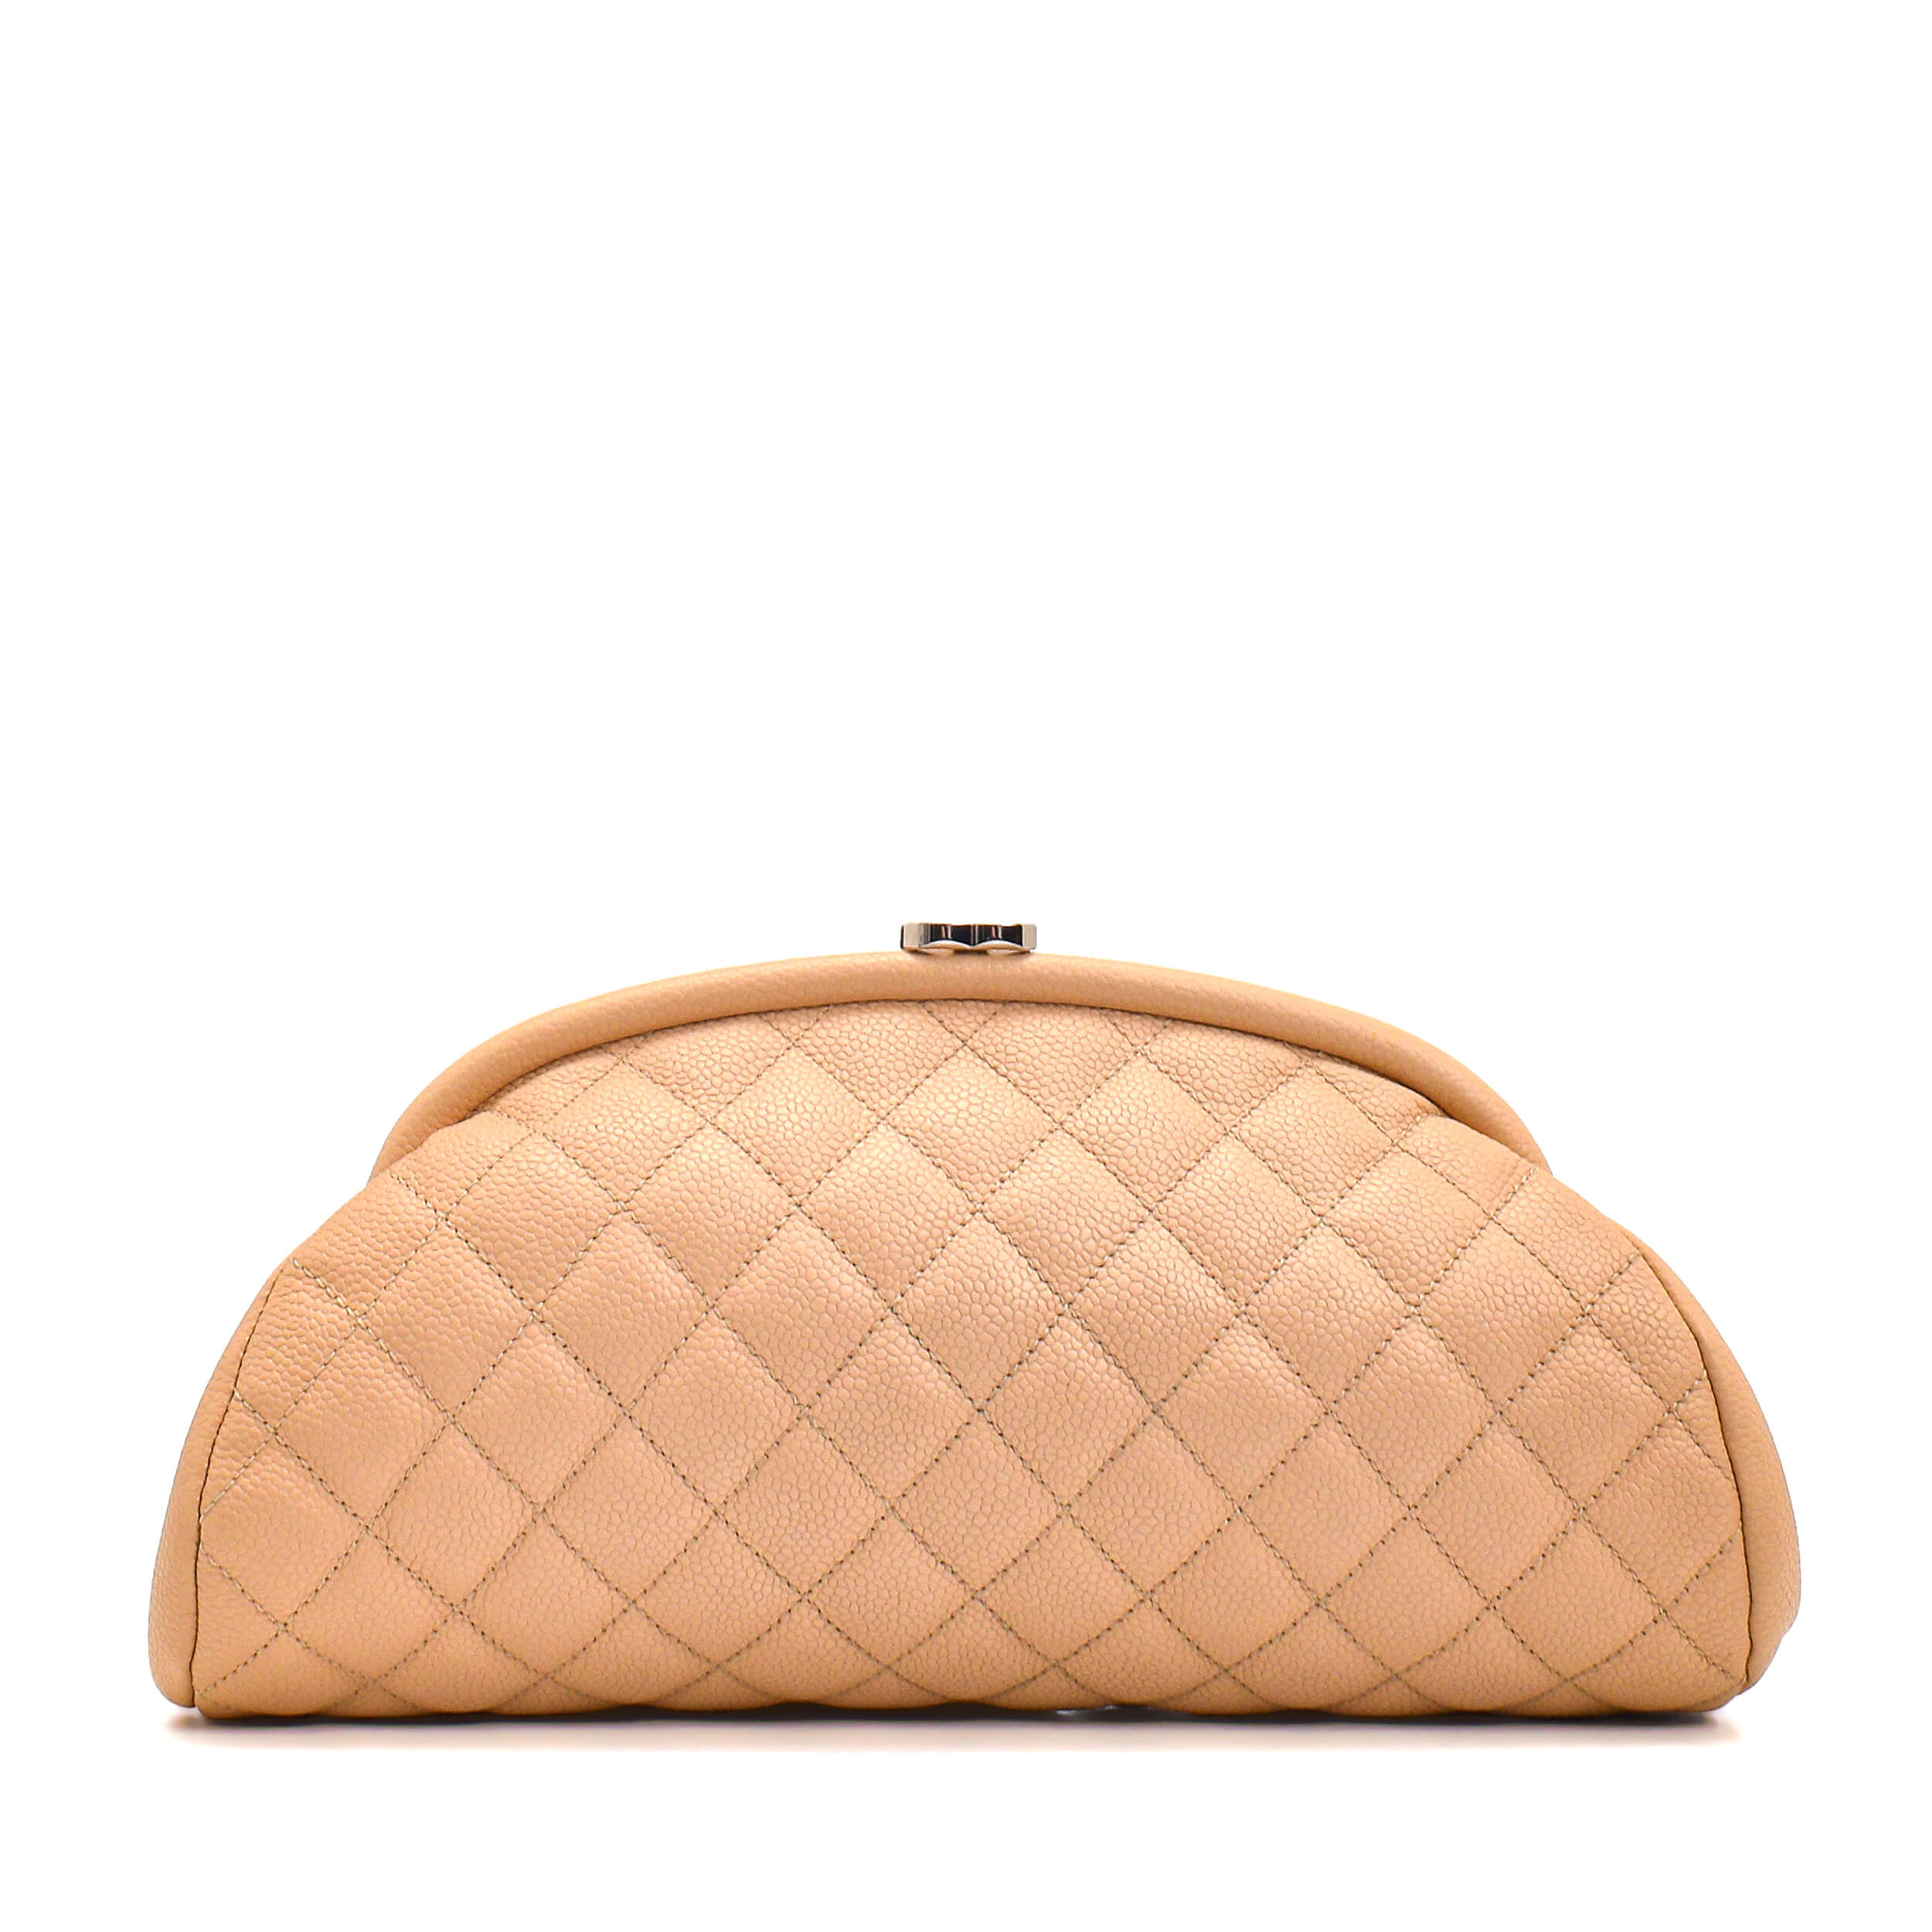 Chanel - Ivory Quilted Calfskin Leather Timeless CC Clutch